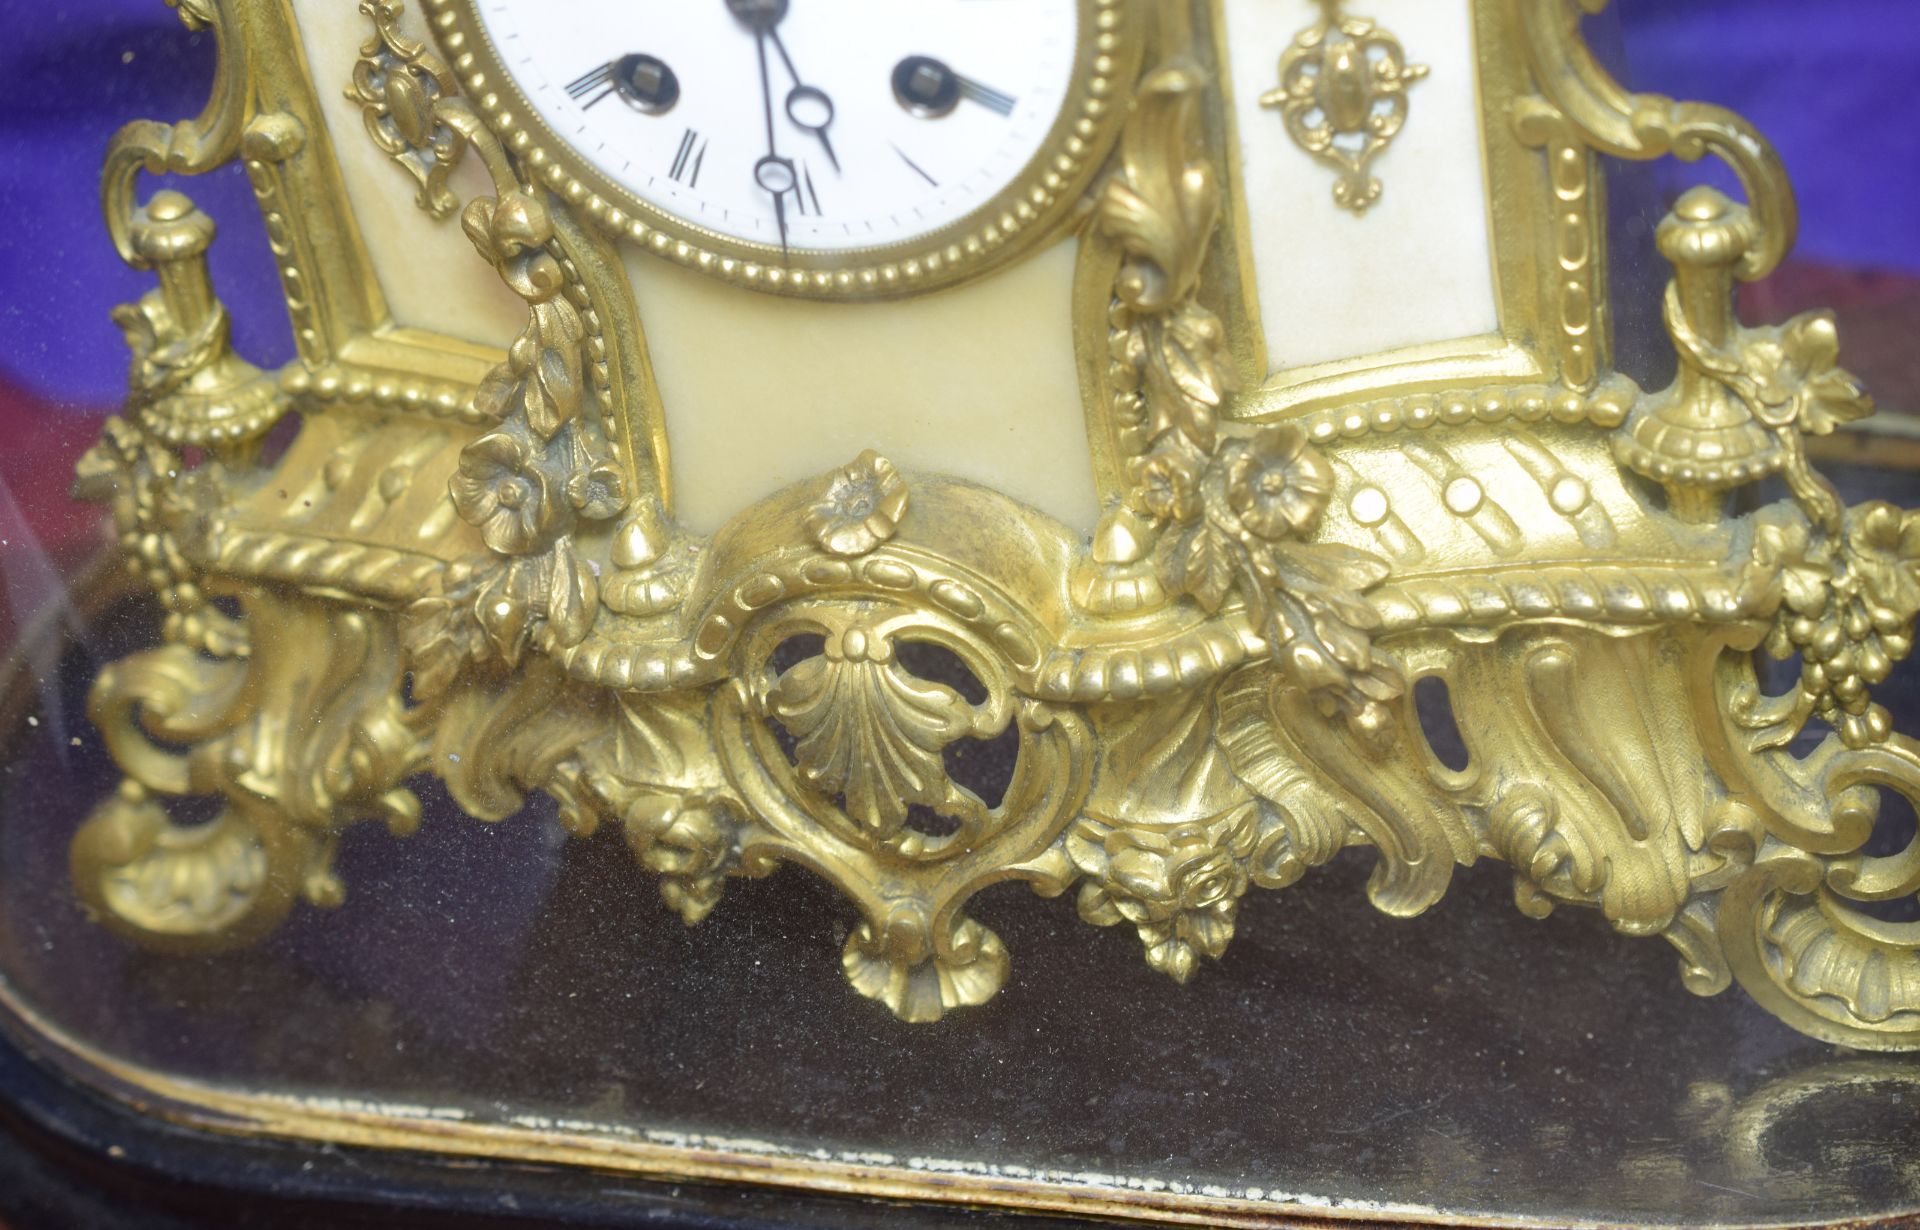 Large Victorian French Domed Clock c1840s - Image 5 of 5